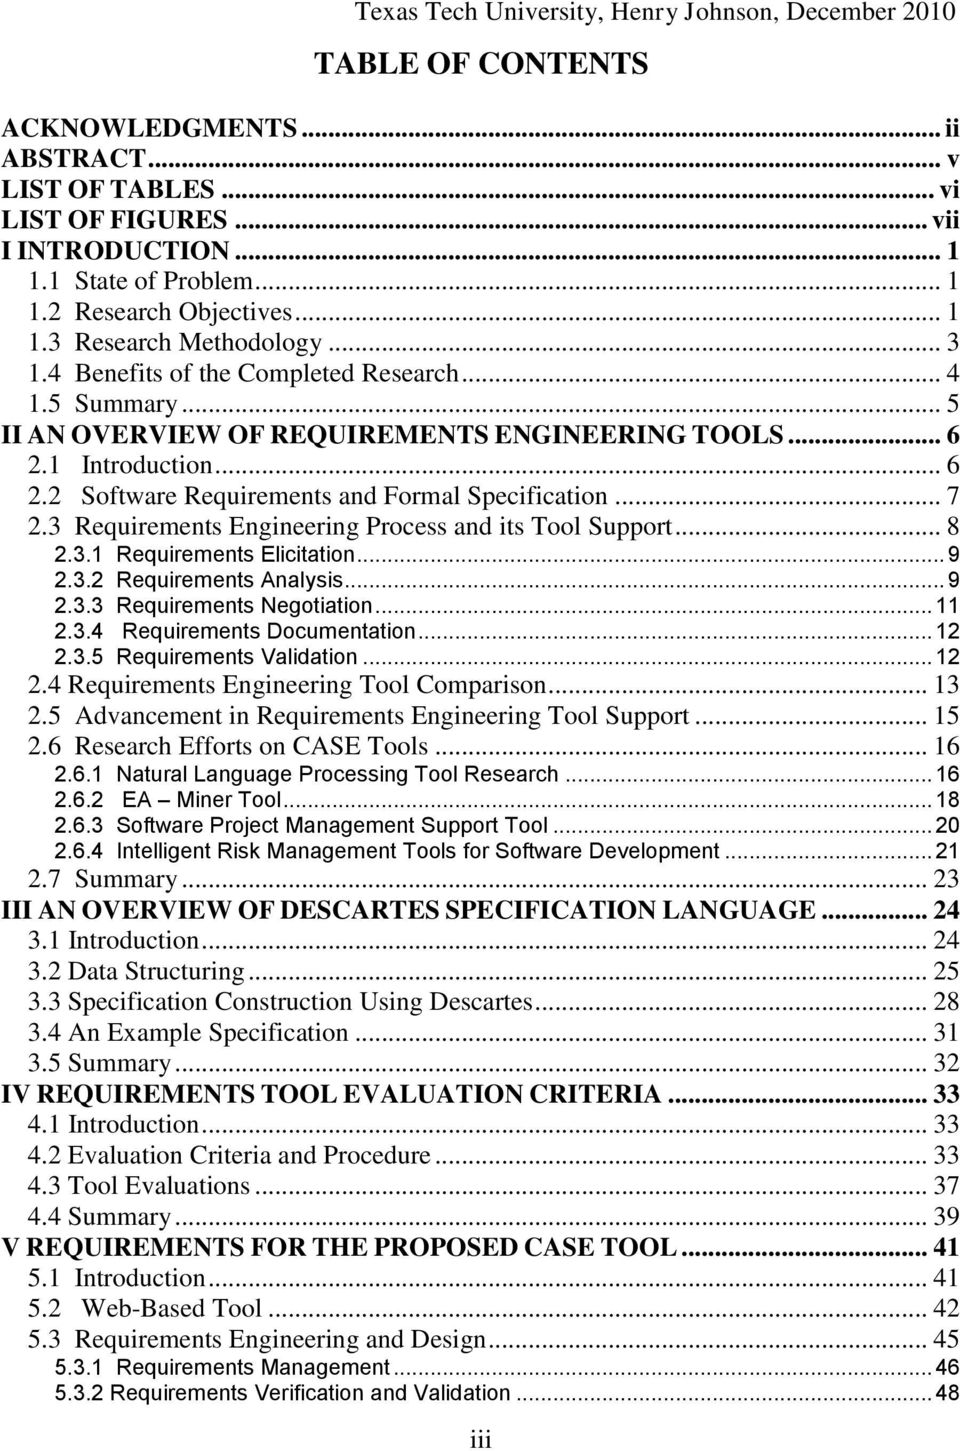 3 Requirements Engineering Process and its Tool Support... 8 2.3.1 Requirements Elicitation... 9 2.3.2 Requirements Analysis... 9 2.3.3 Requirements Negotiation... 11 2.3.4 Requirements Documentation.